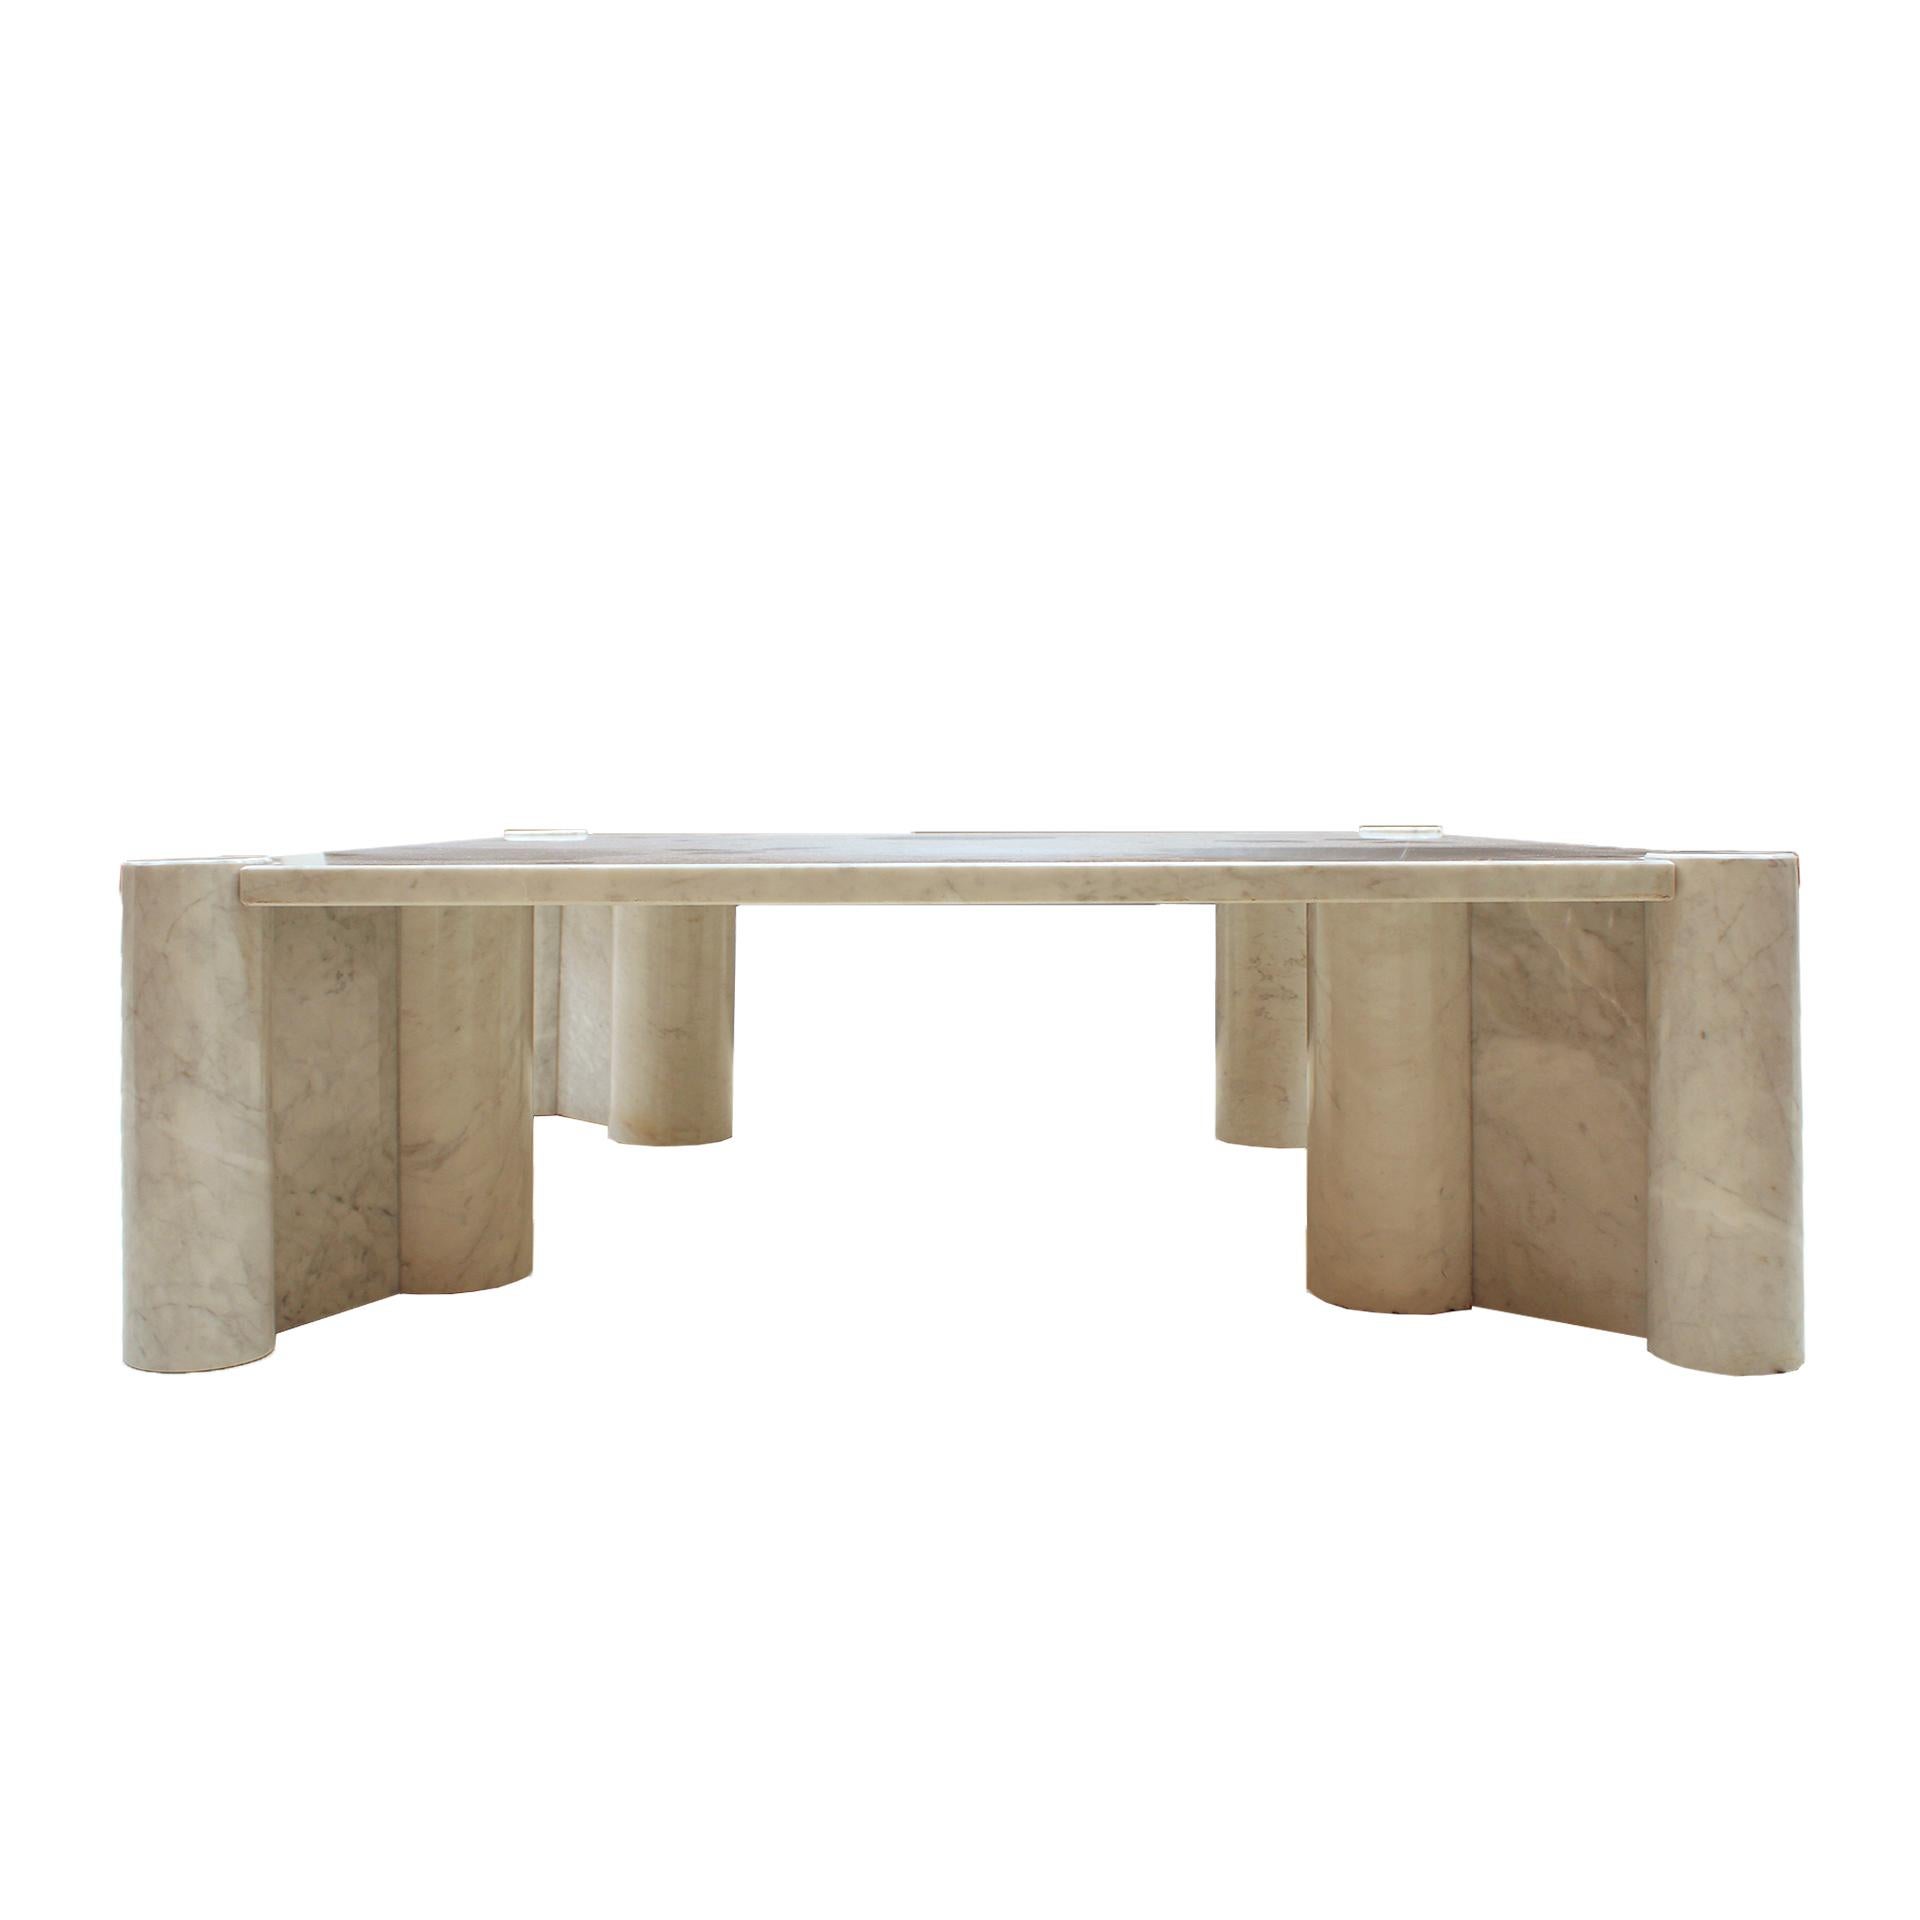 Mid-20th Century Jumbo Carrara Marble Italian Square Coffee Table by Gae Aulenti For Knoll, 1960s For Sale